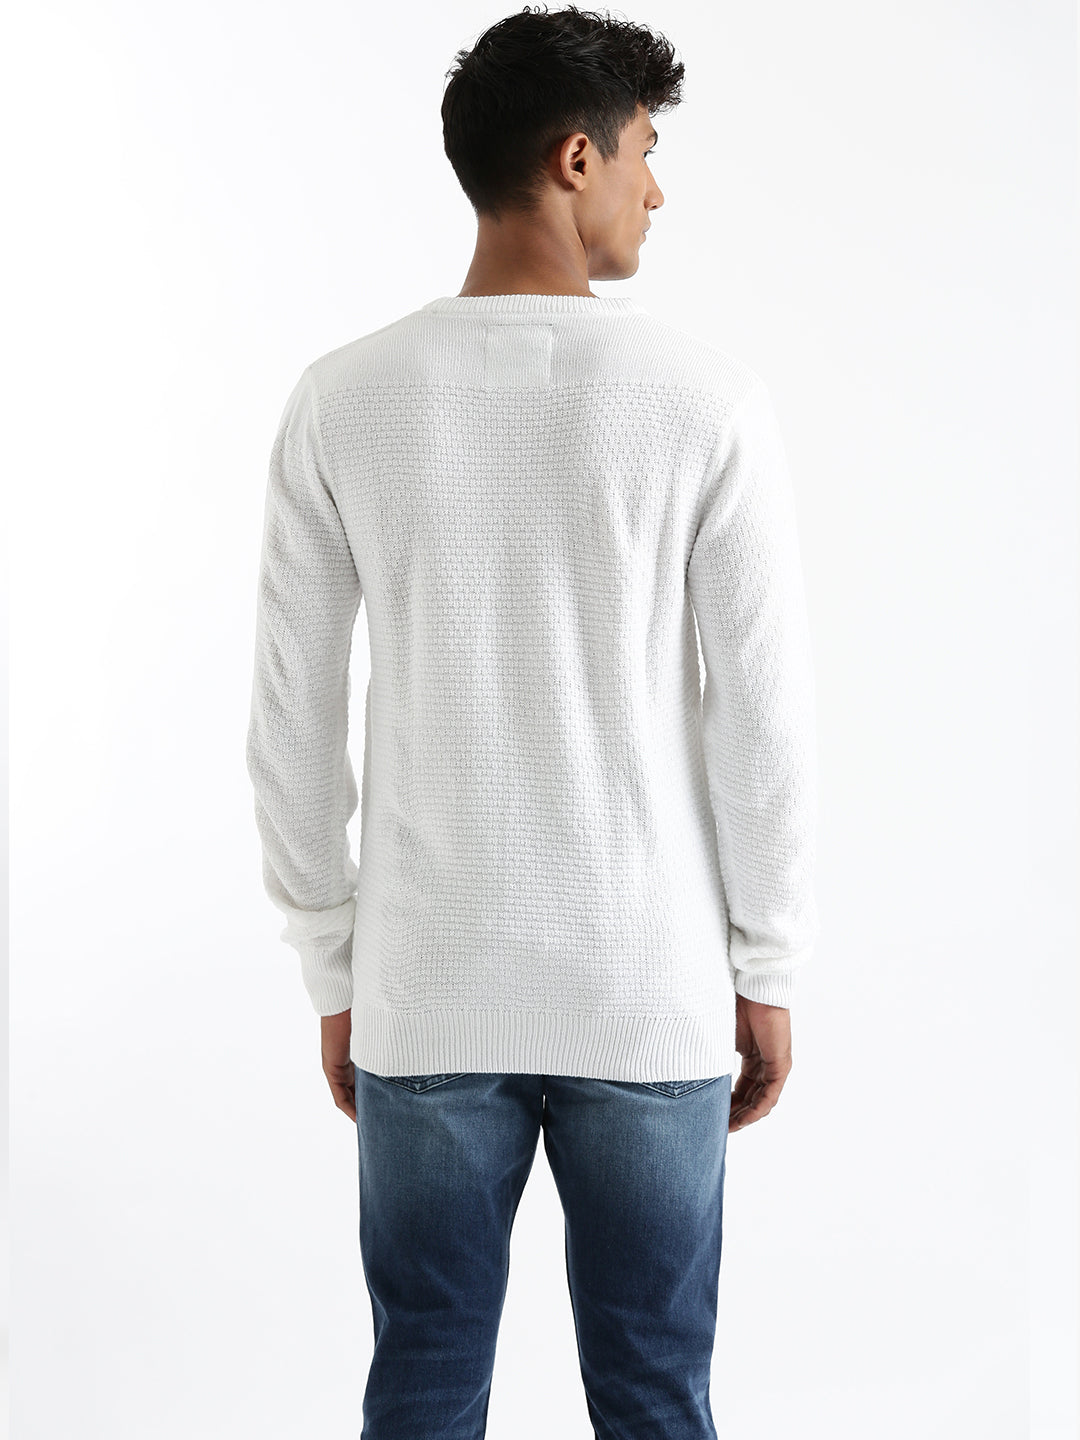 Classic Style White Sweater